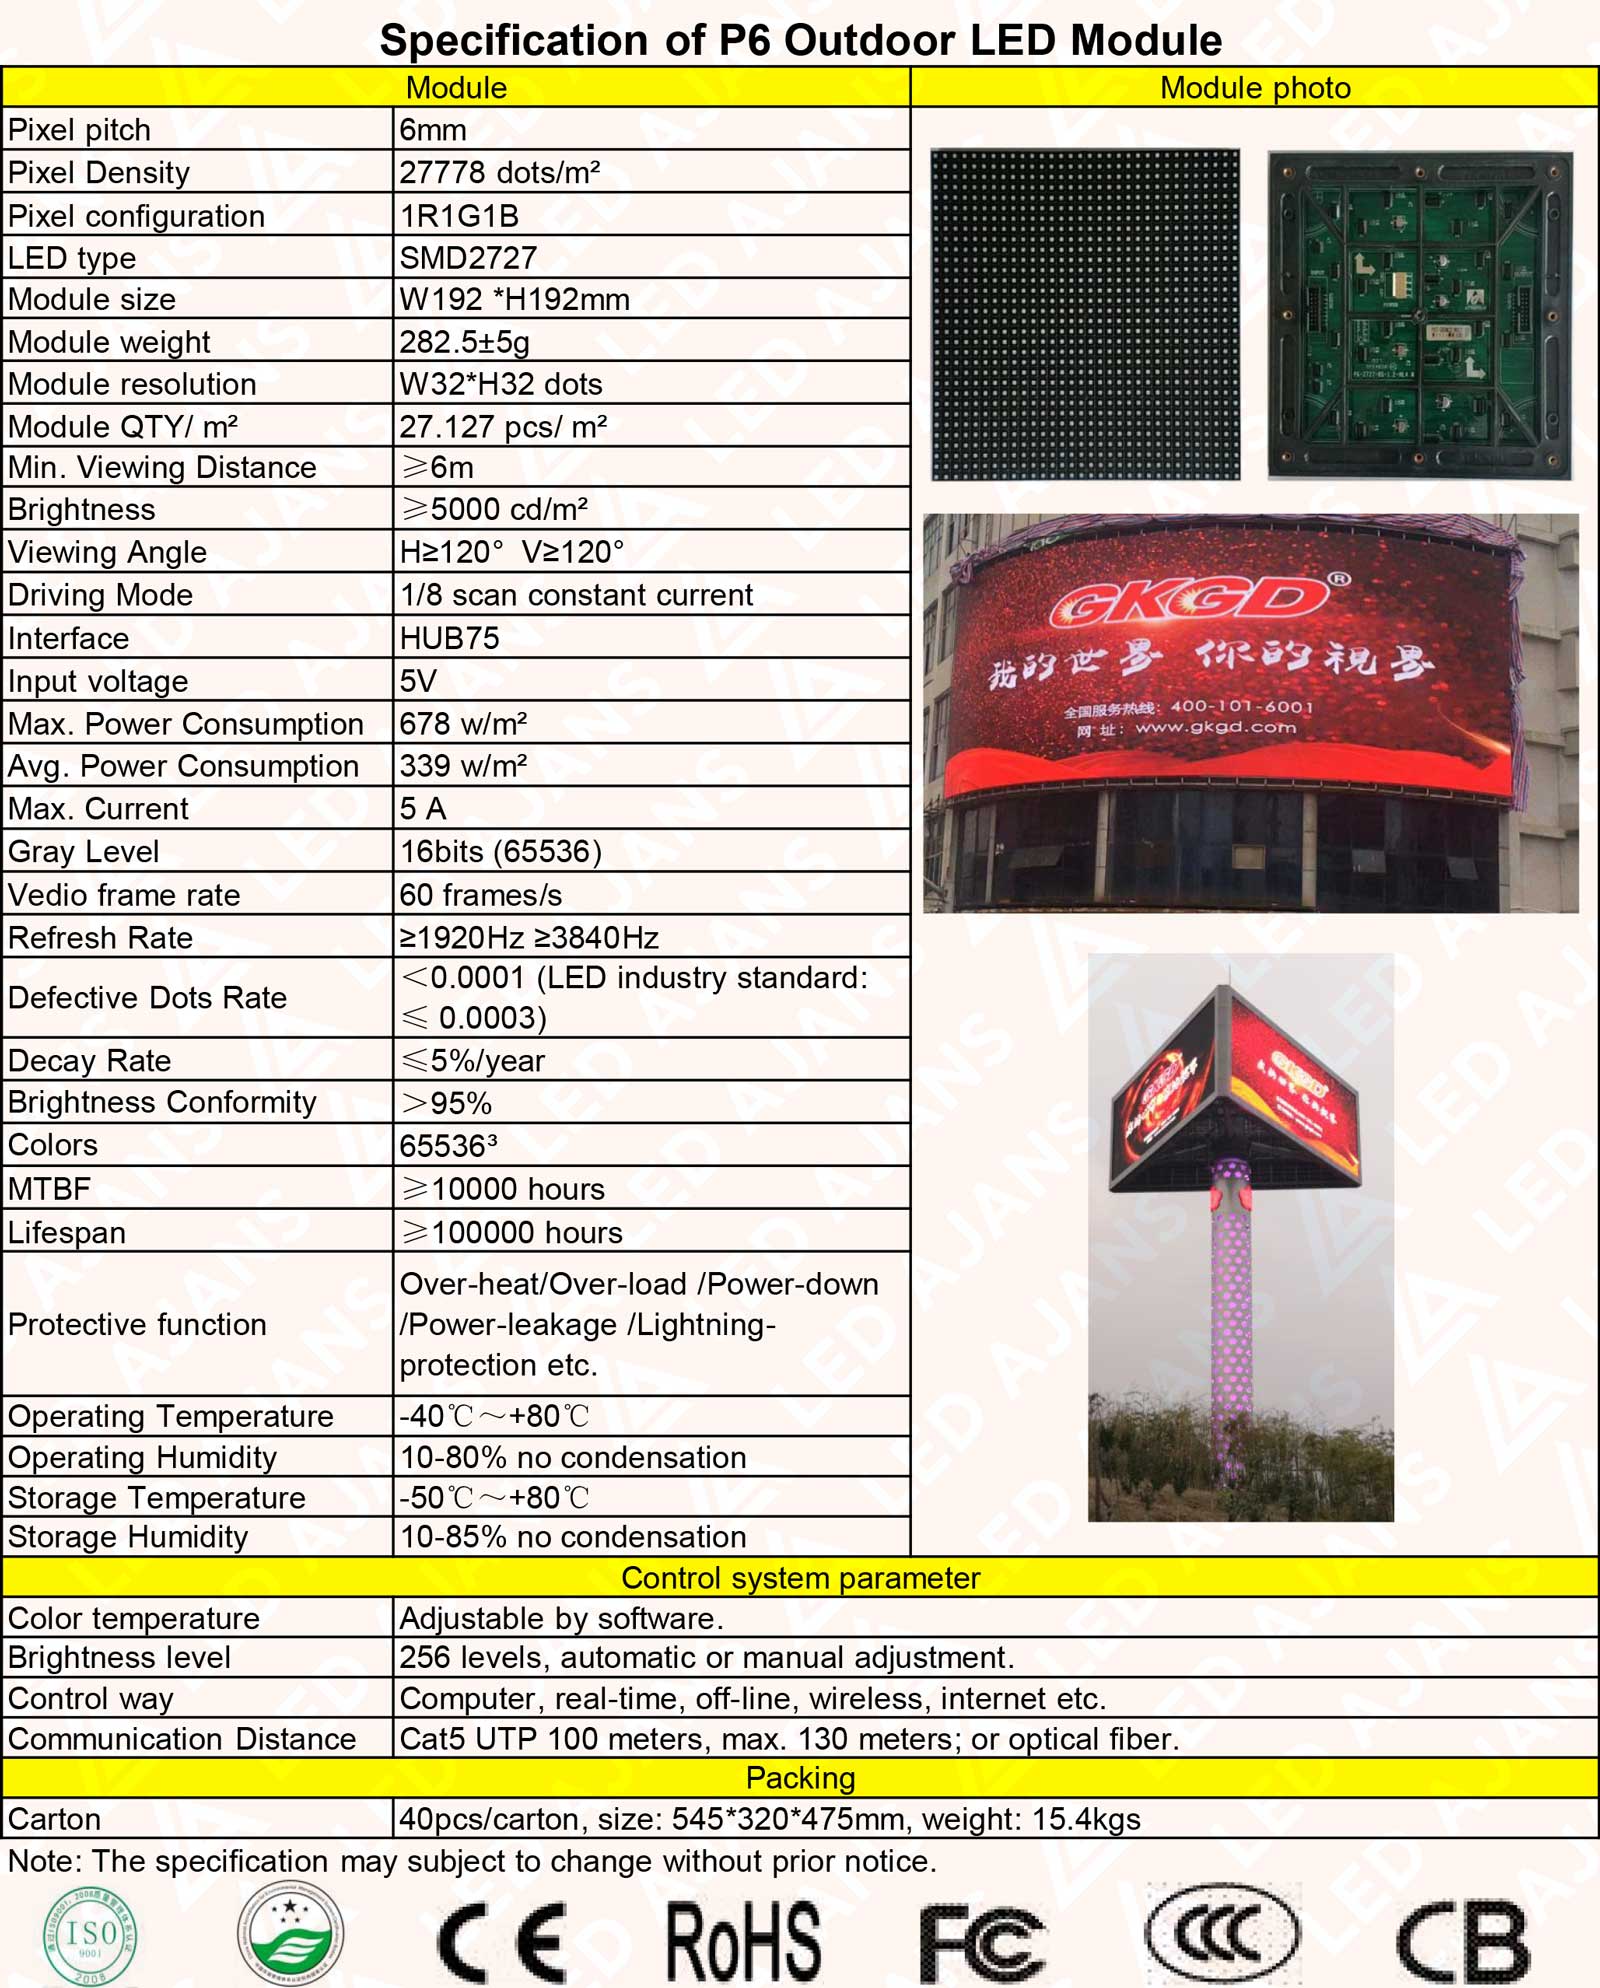 P6 Outdoor LED Module Specification